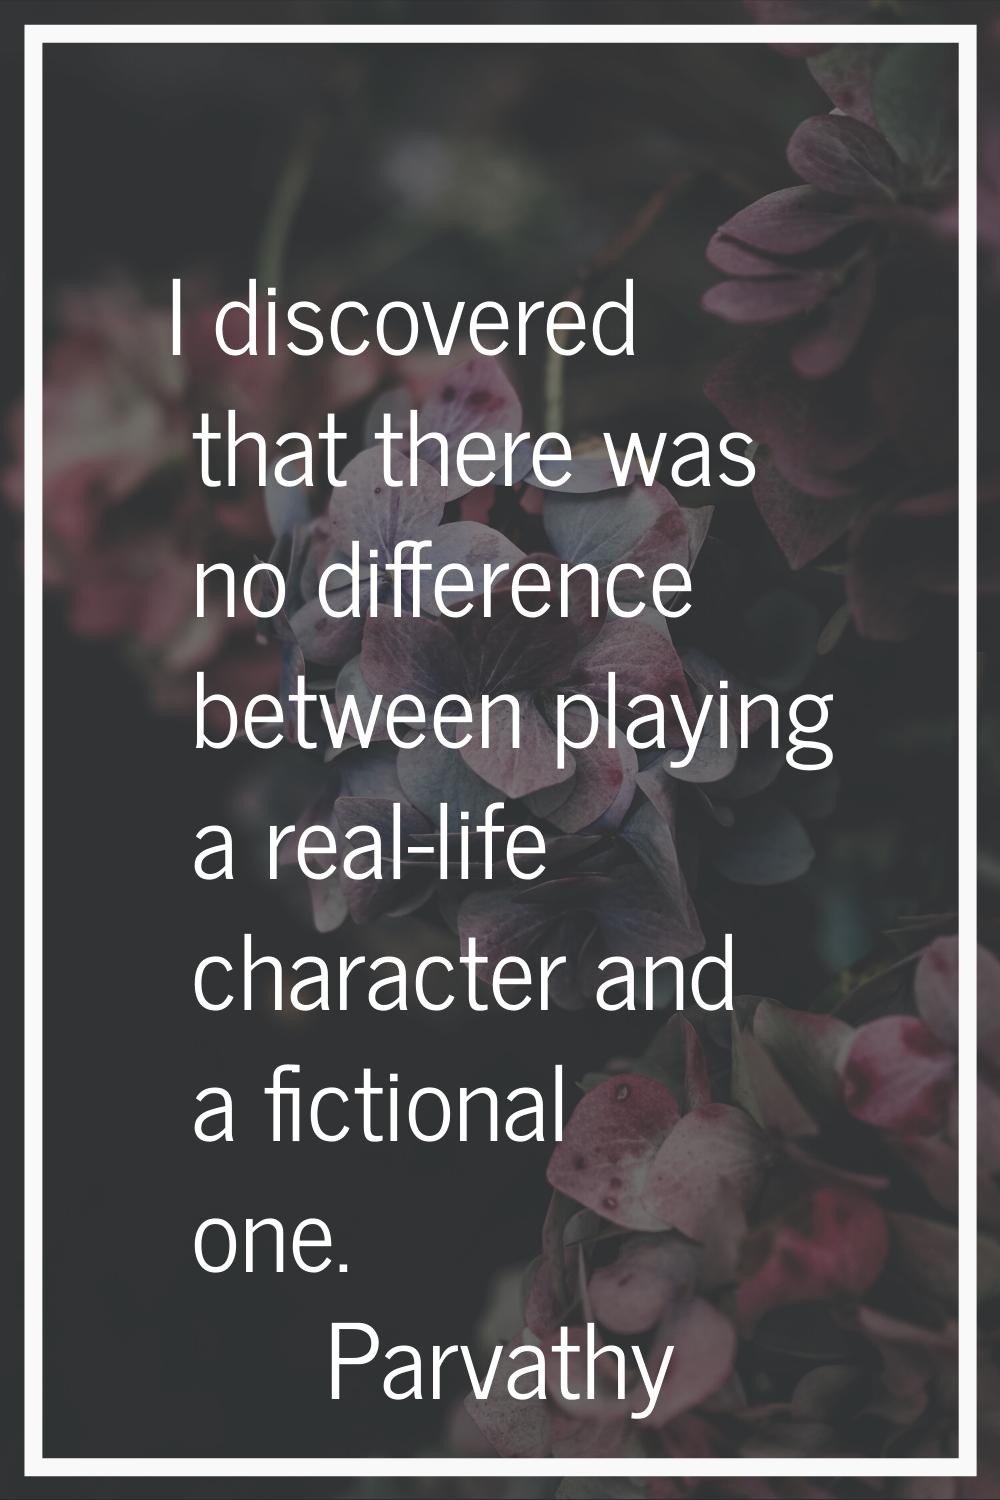 I discovered that there was no difference between playing a real-life character and a fictional one